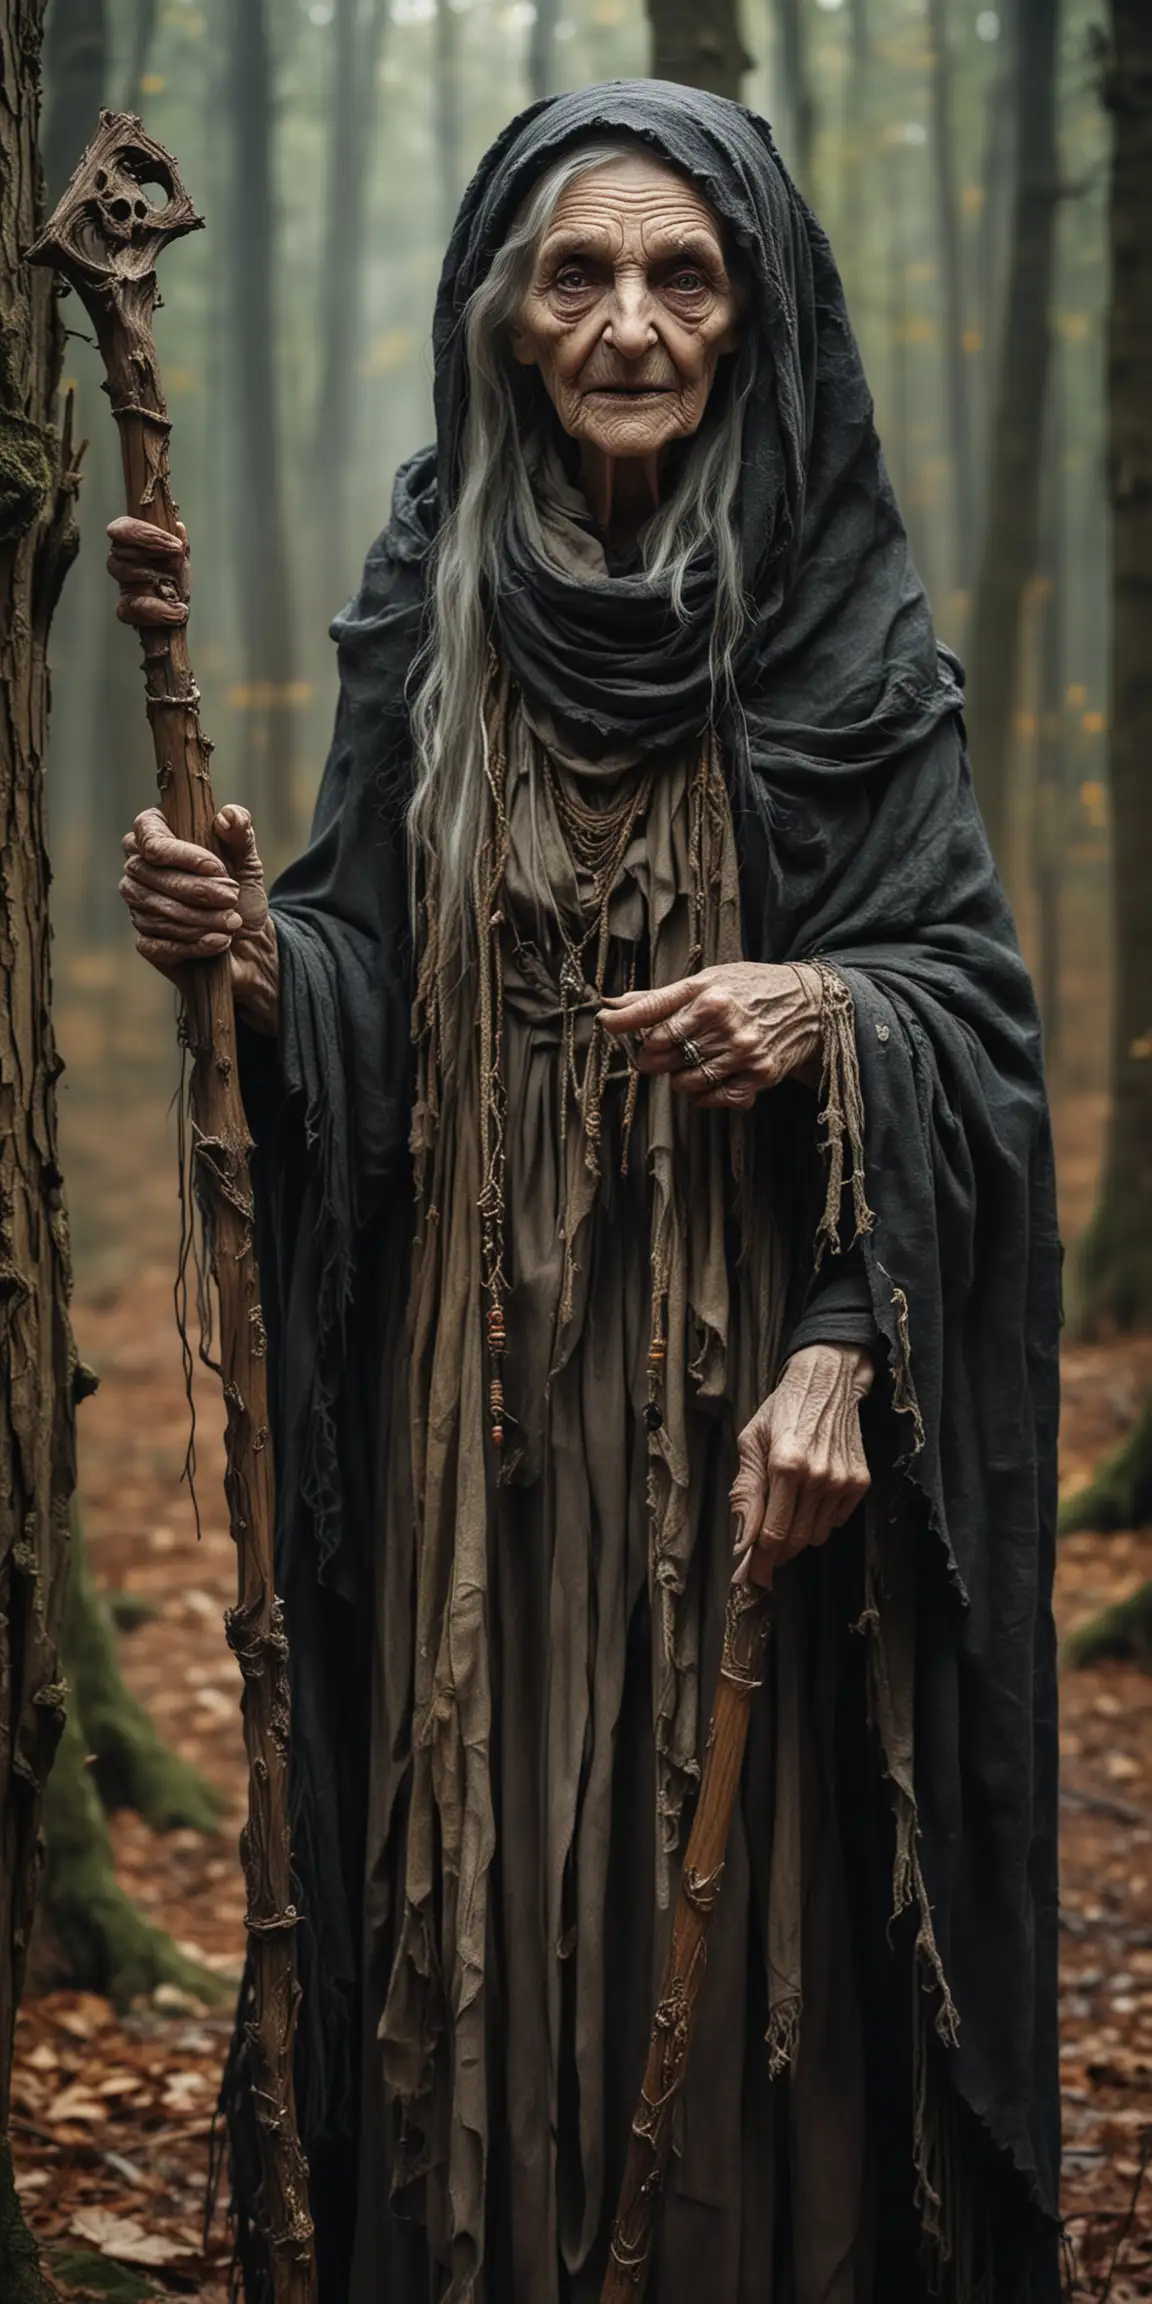 Fantasy Old Crone with Stained Teeth in the Woods